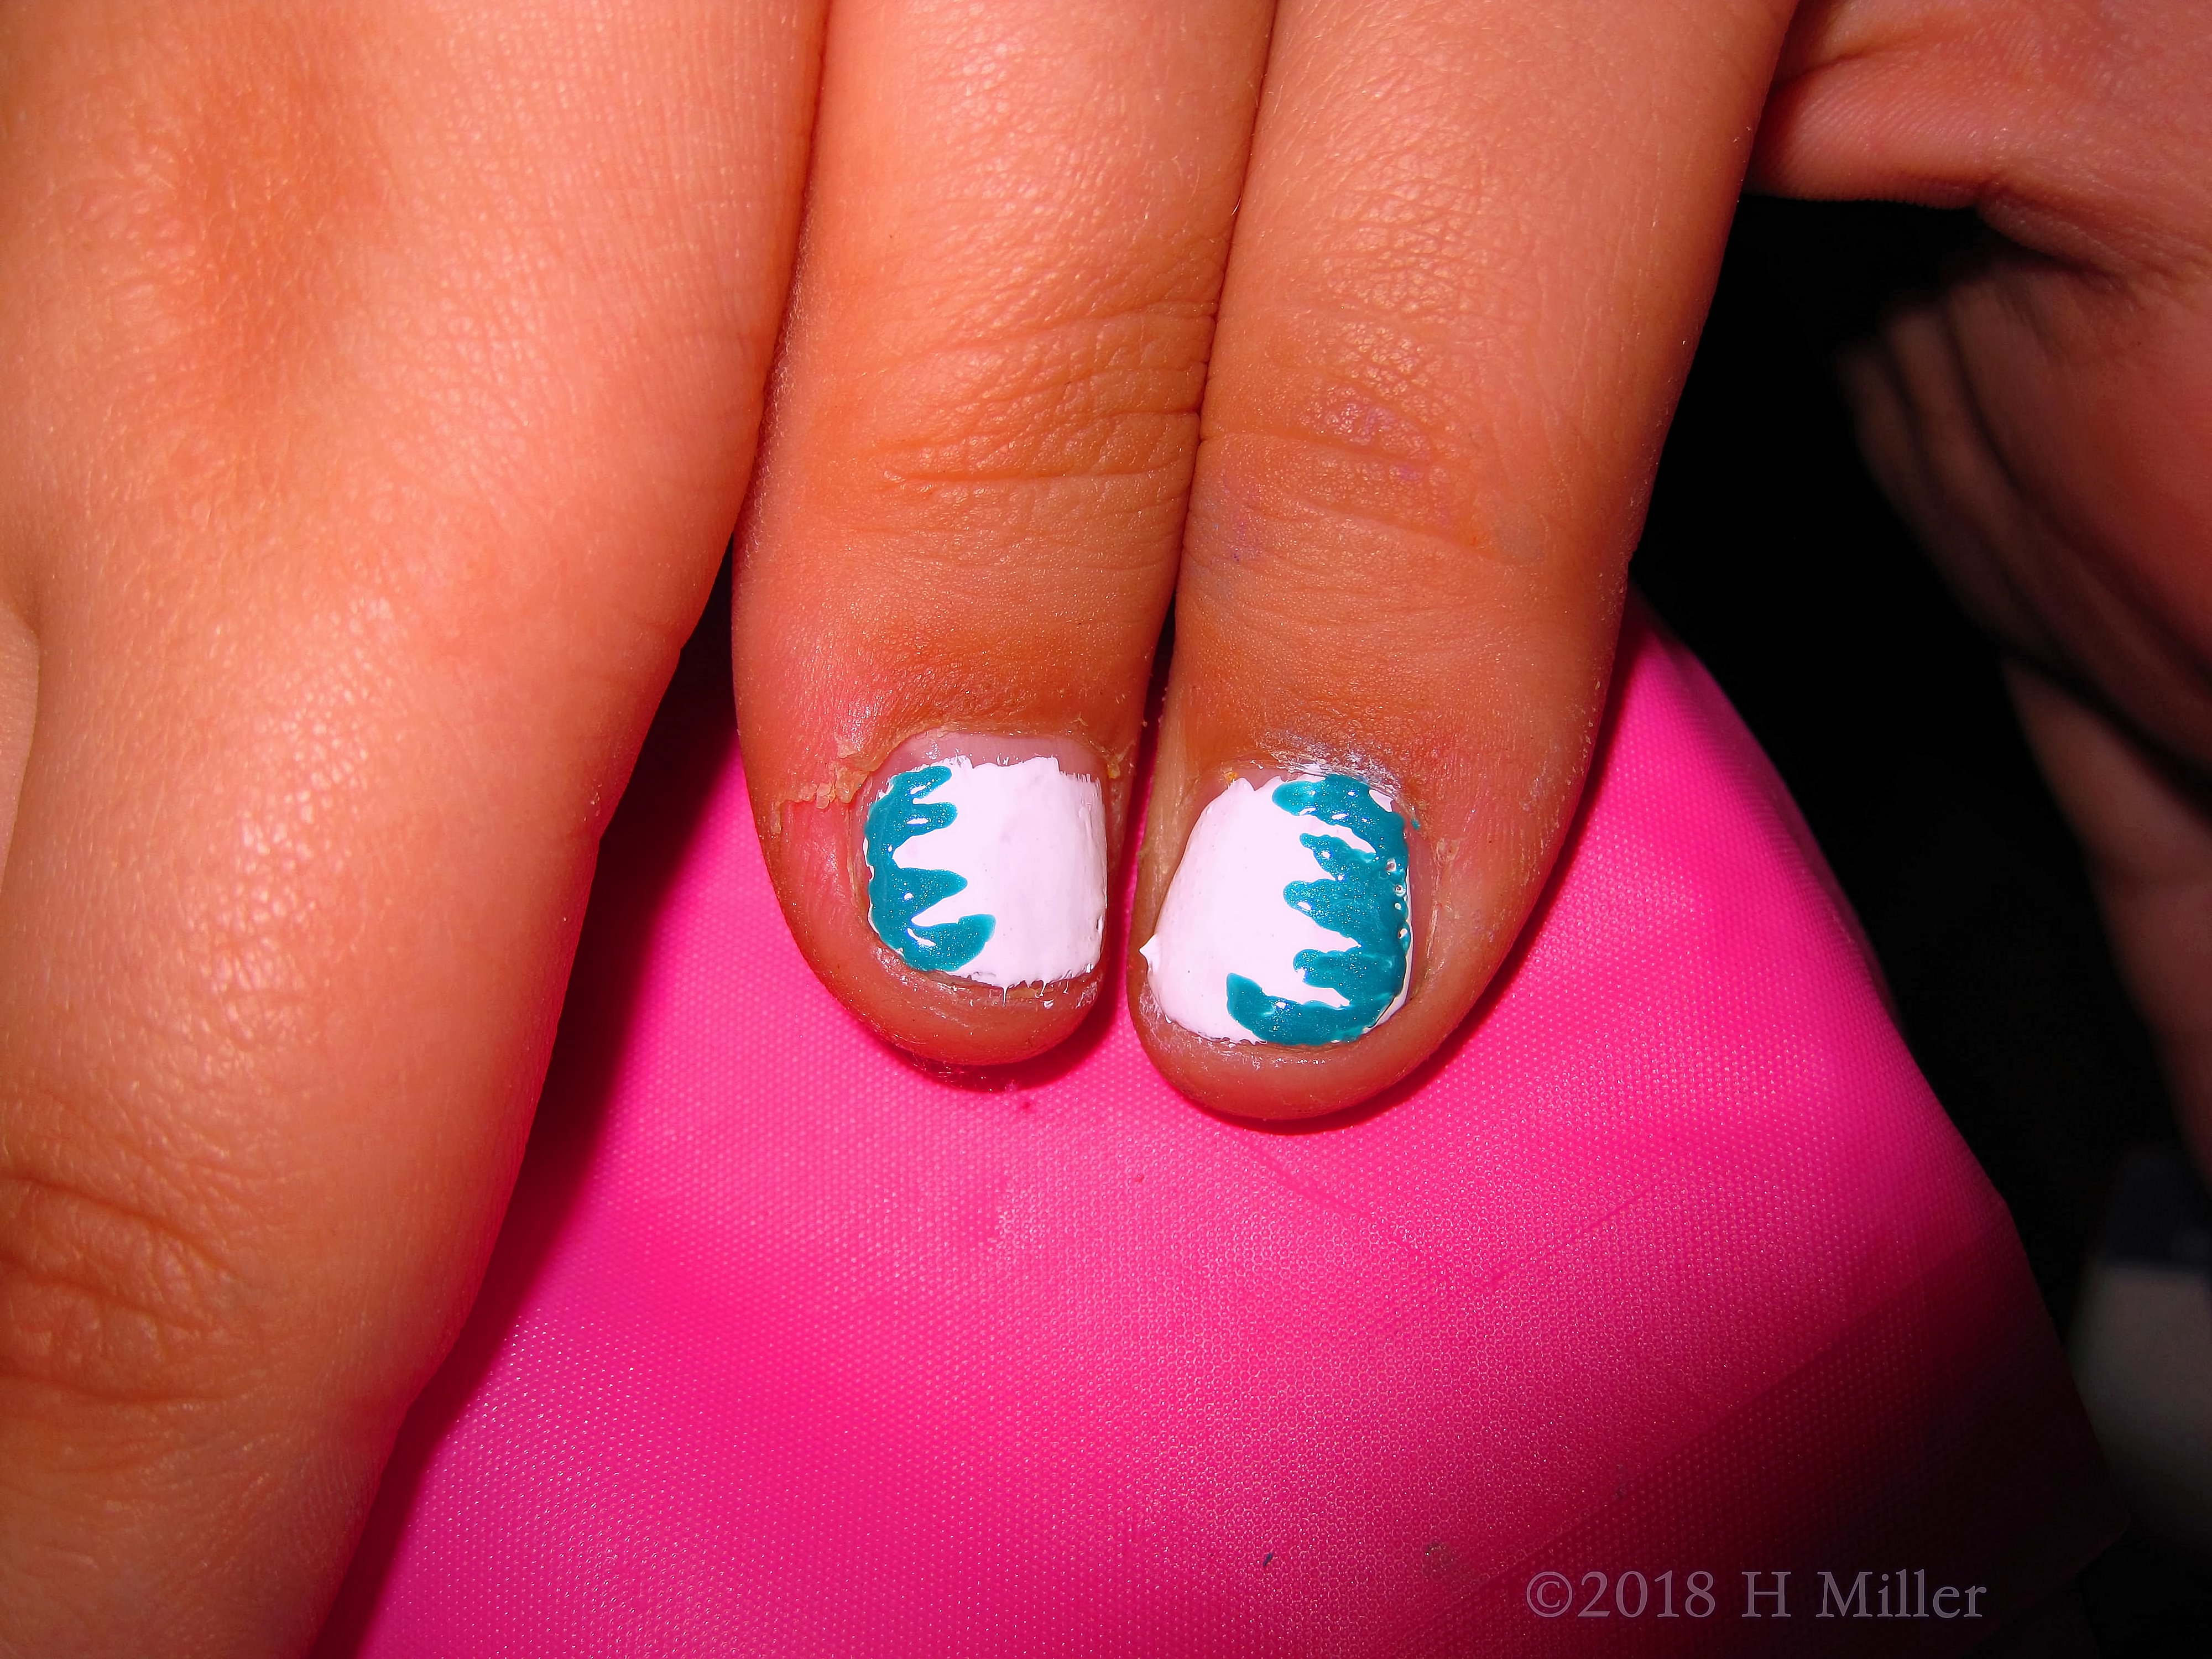 White Kids Manicure With Teal Nail Design Closeup 4